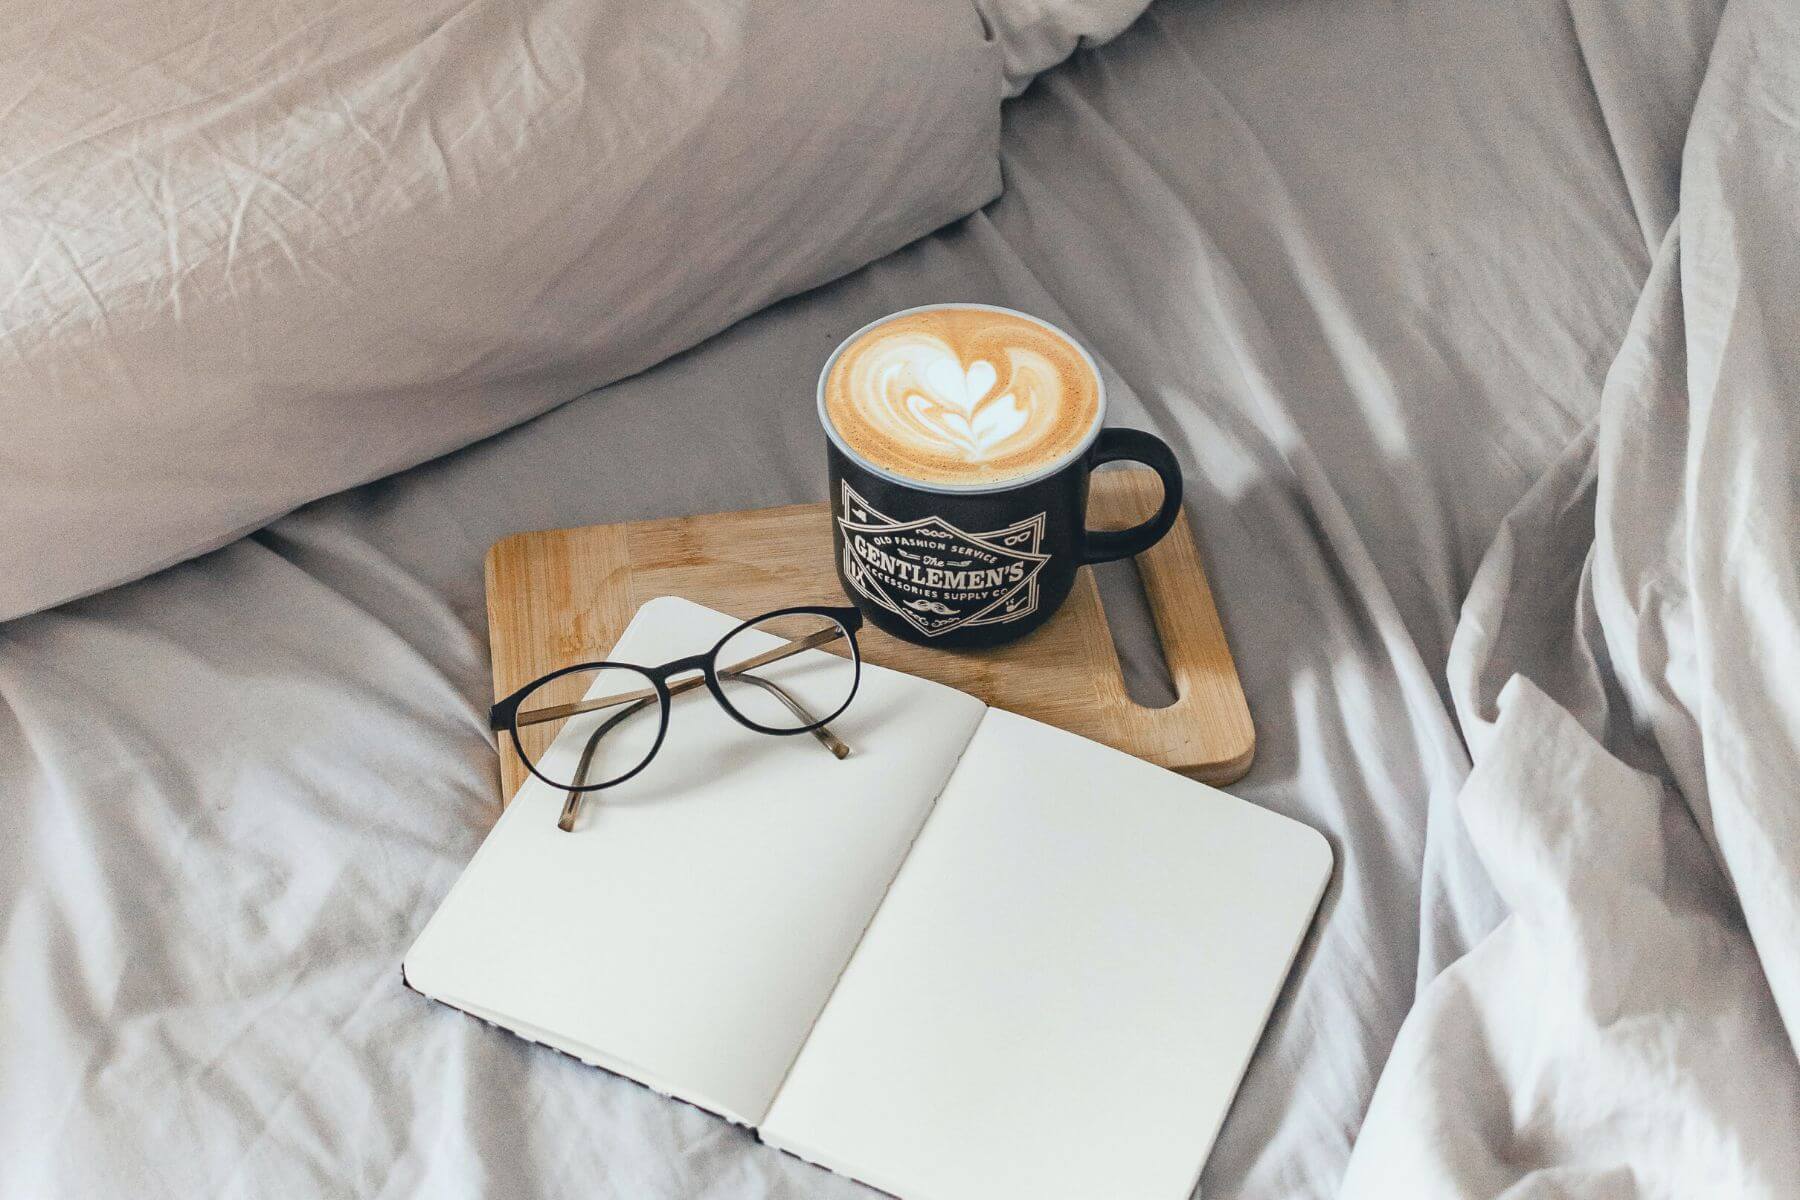 A cup of coffee and a notebook are resting on a bed.